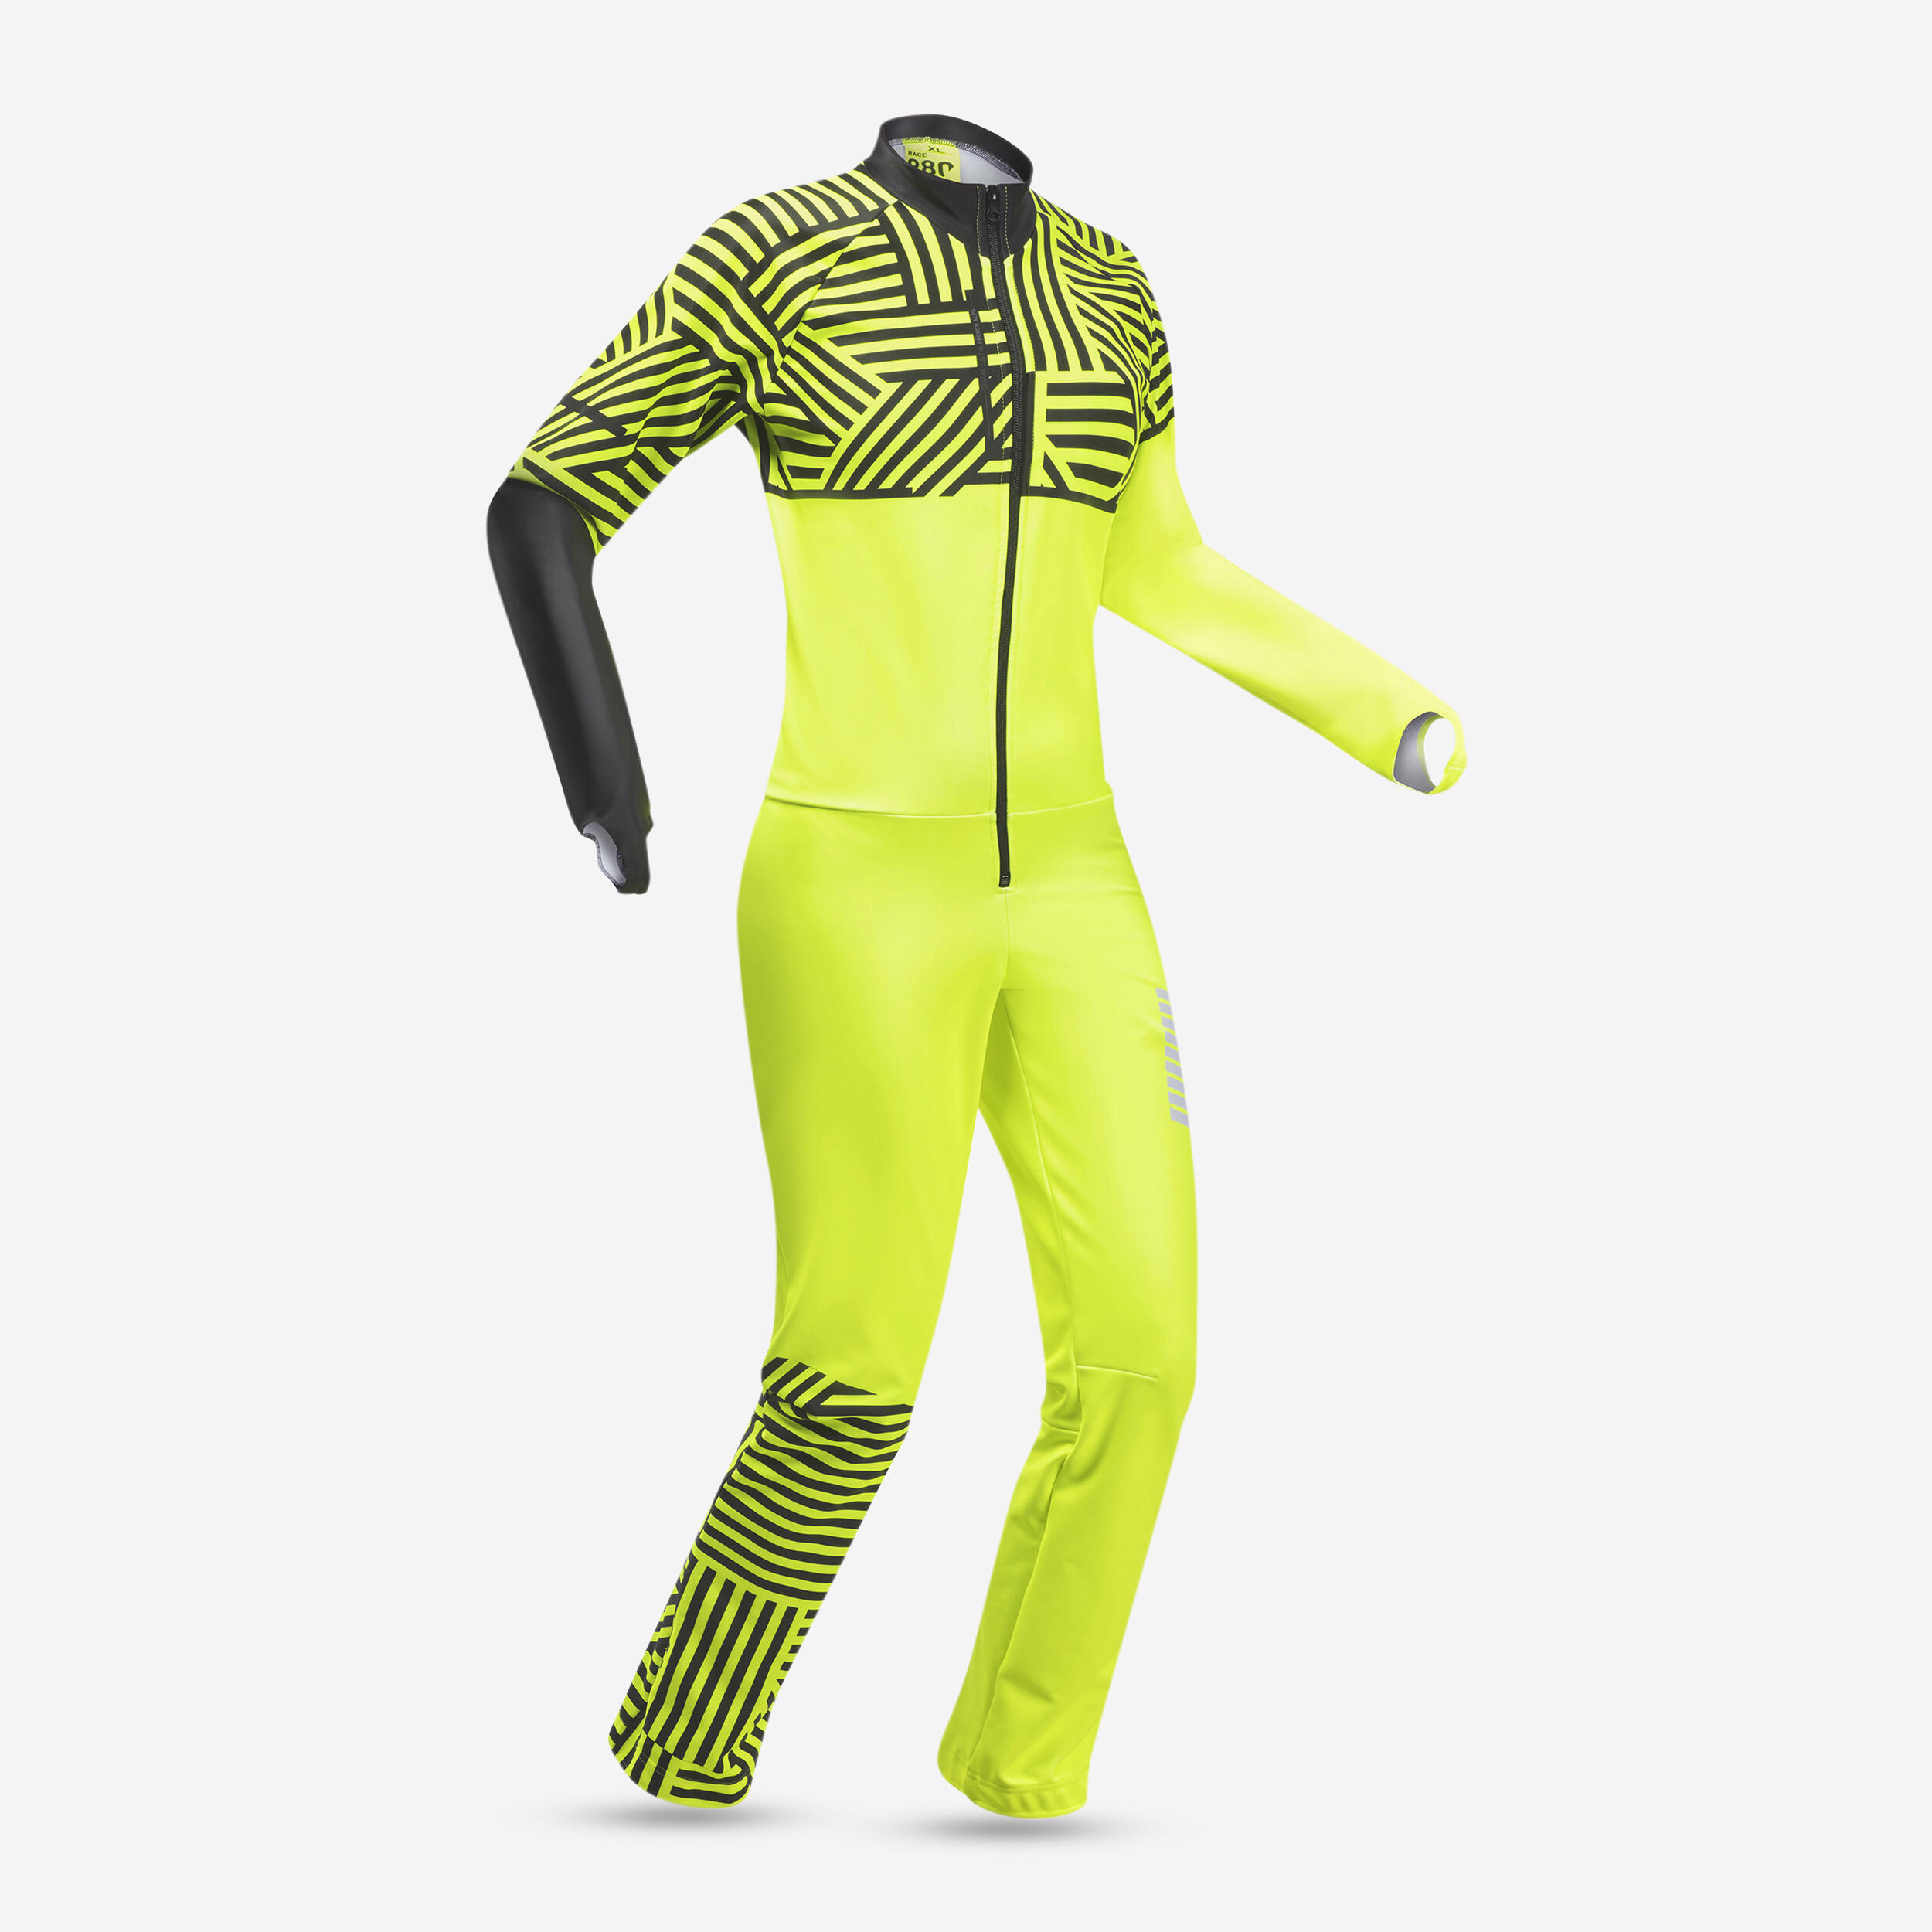 KIDS’ SKI COMPETITION SUIT 980 - YELLOW 1/1